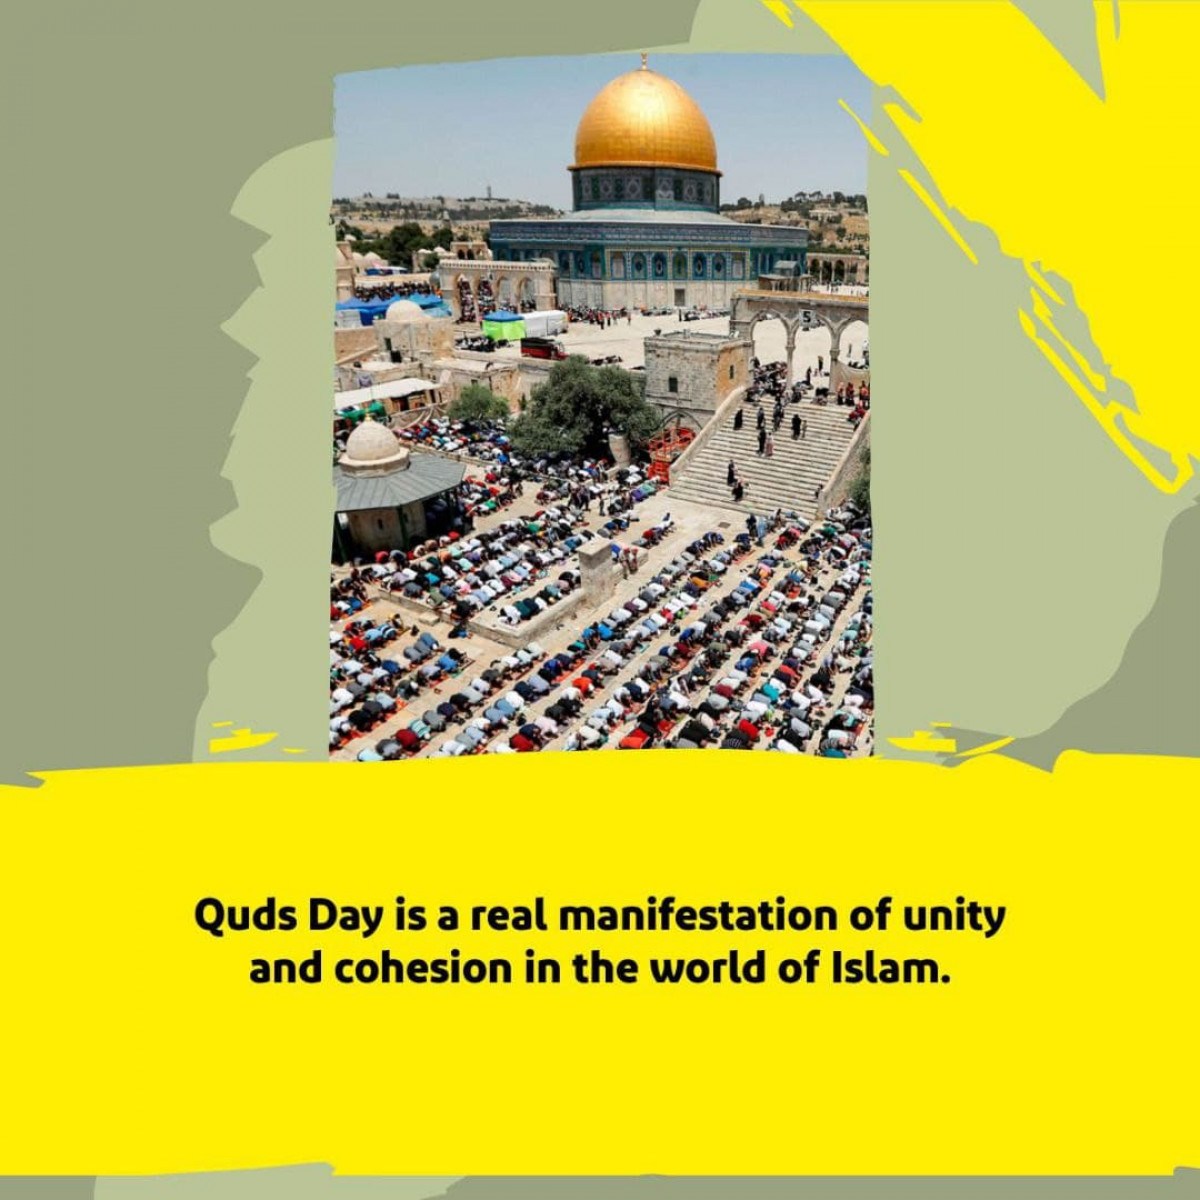 Quds Day is a real manifestation of unity and cohesion in the world of Islam